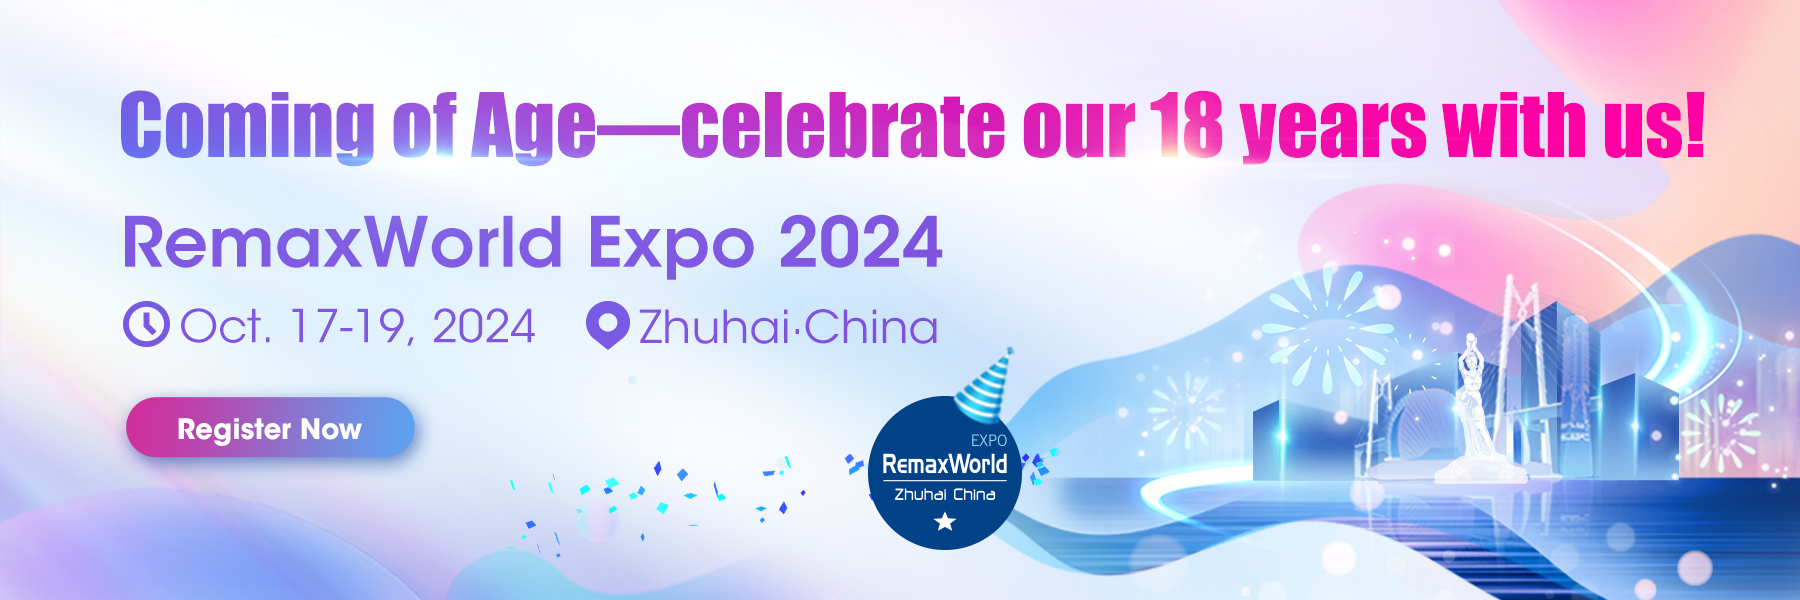 All you need to know about RemaxWorld Expo 2024